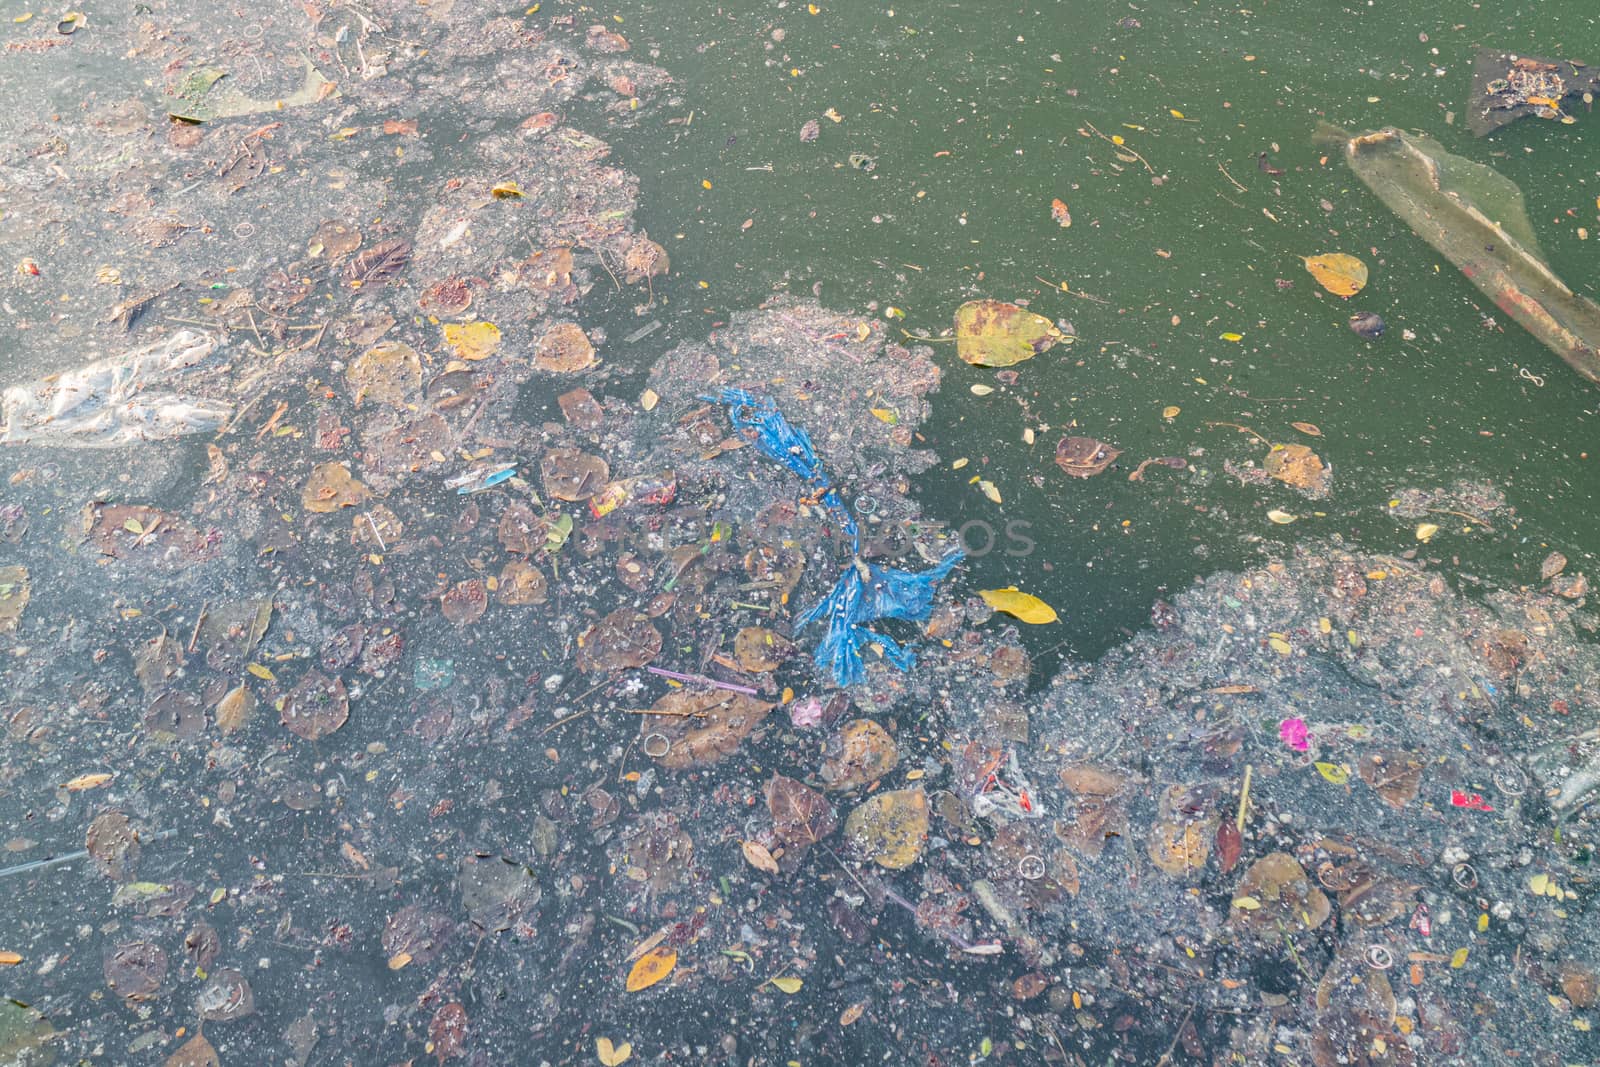 Grease and plastic waste floating on the surface of the water ca by panyajampatong